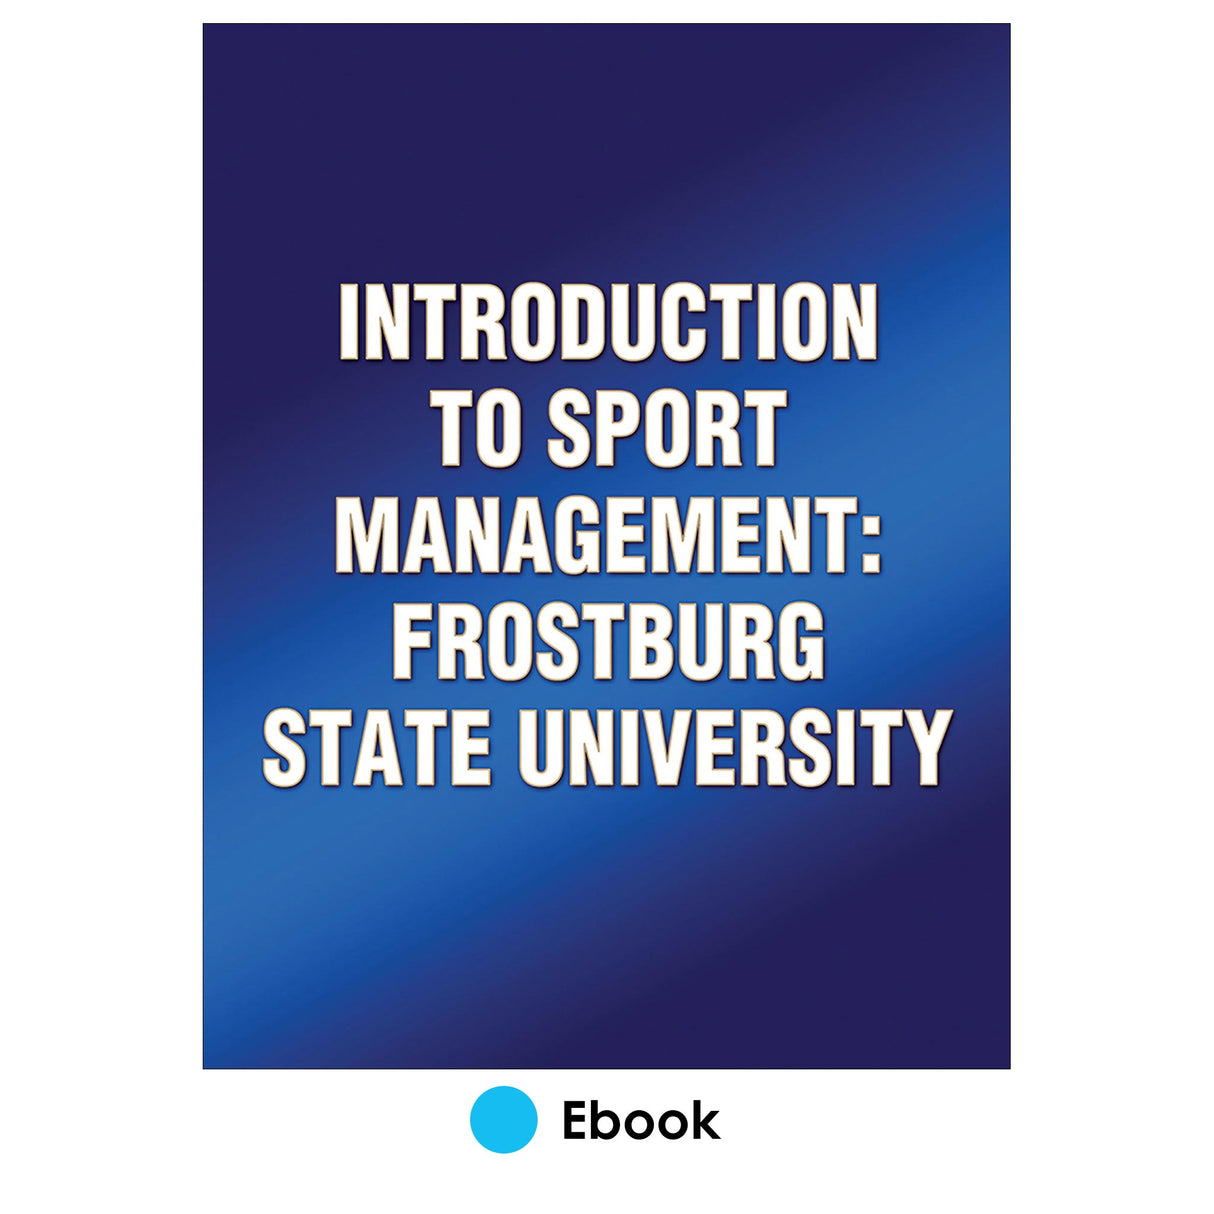 Introduction to Sport Management: Frostburg State University